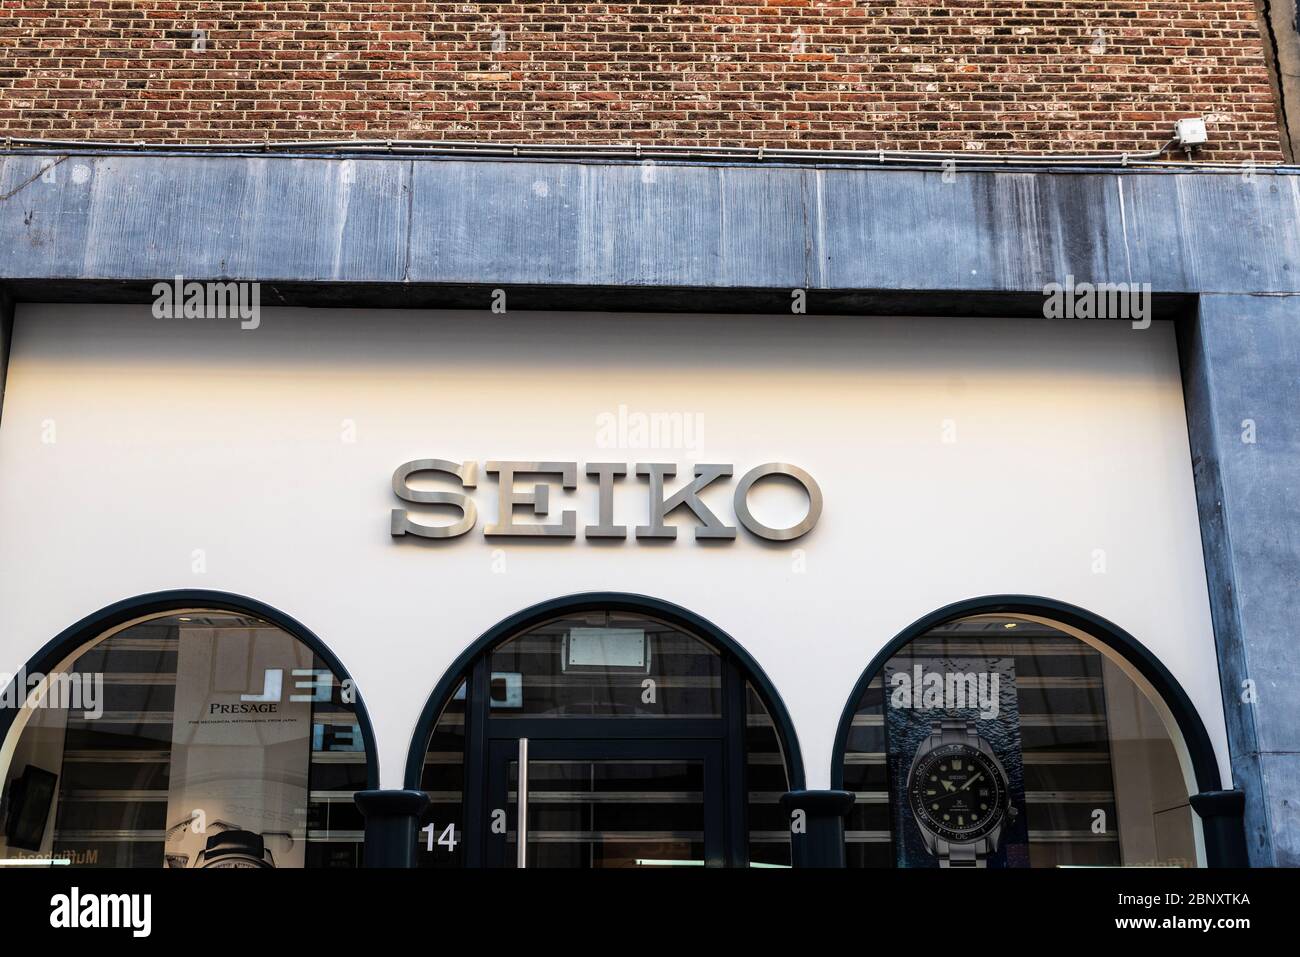 Amsterdam, Netherlands - September 9, 2018: Facade of a Seiko watch store  in the center of Amsterdam, Netherlands Stock Photo - Alamy